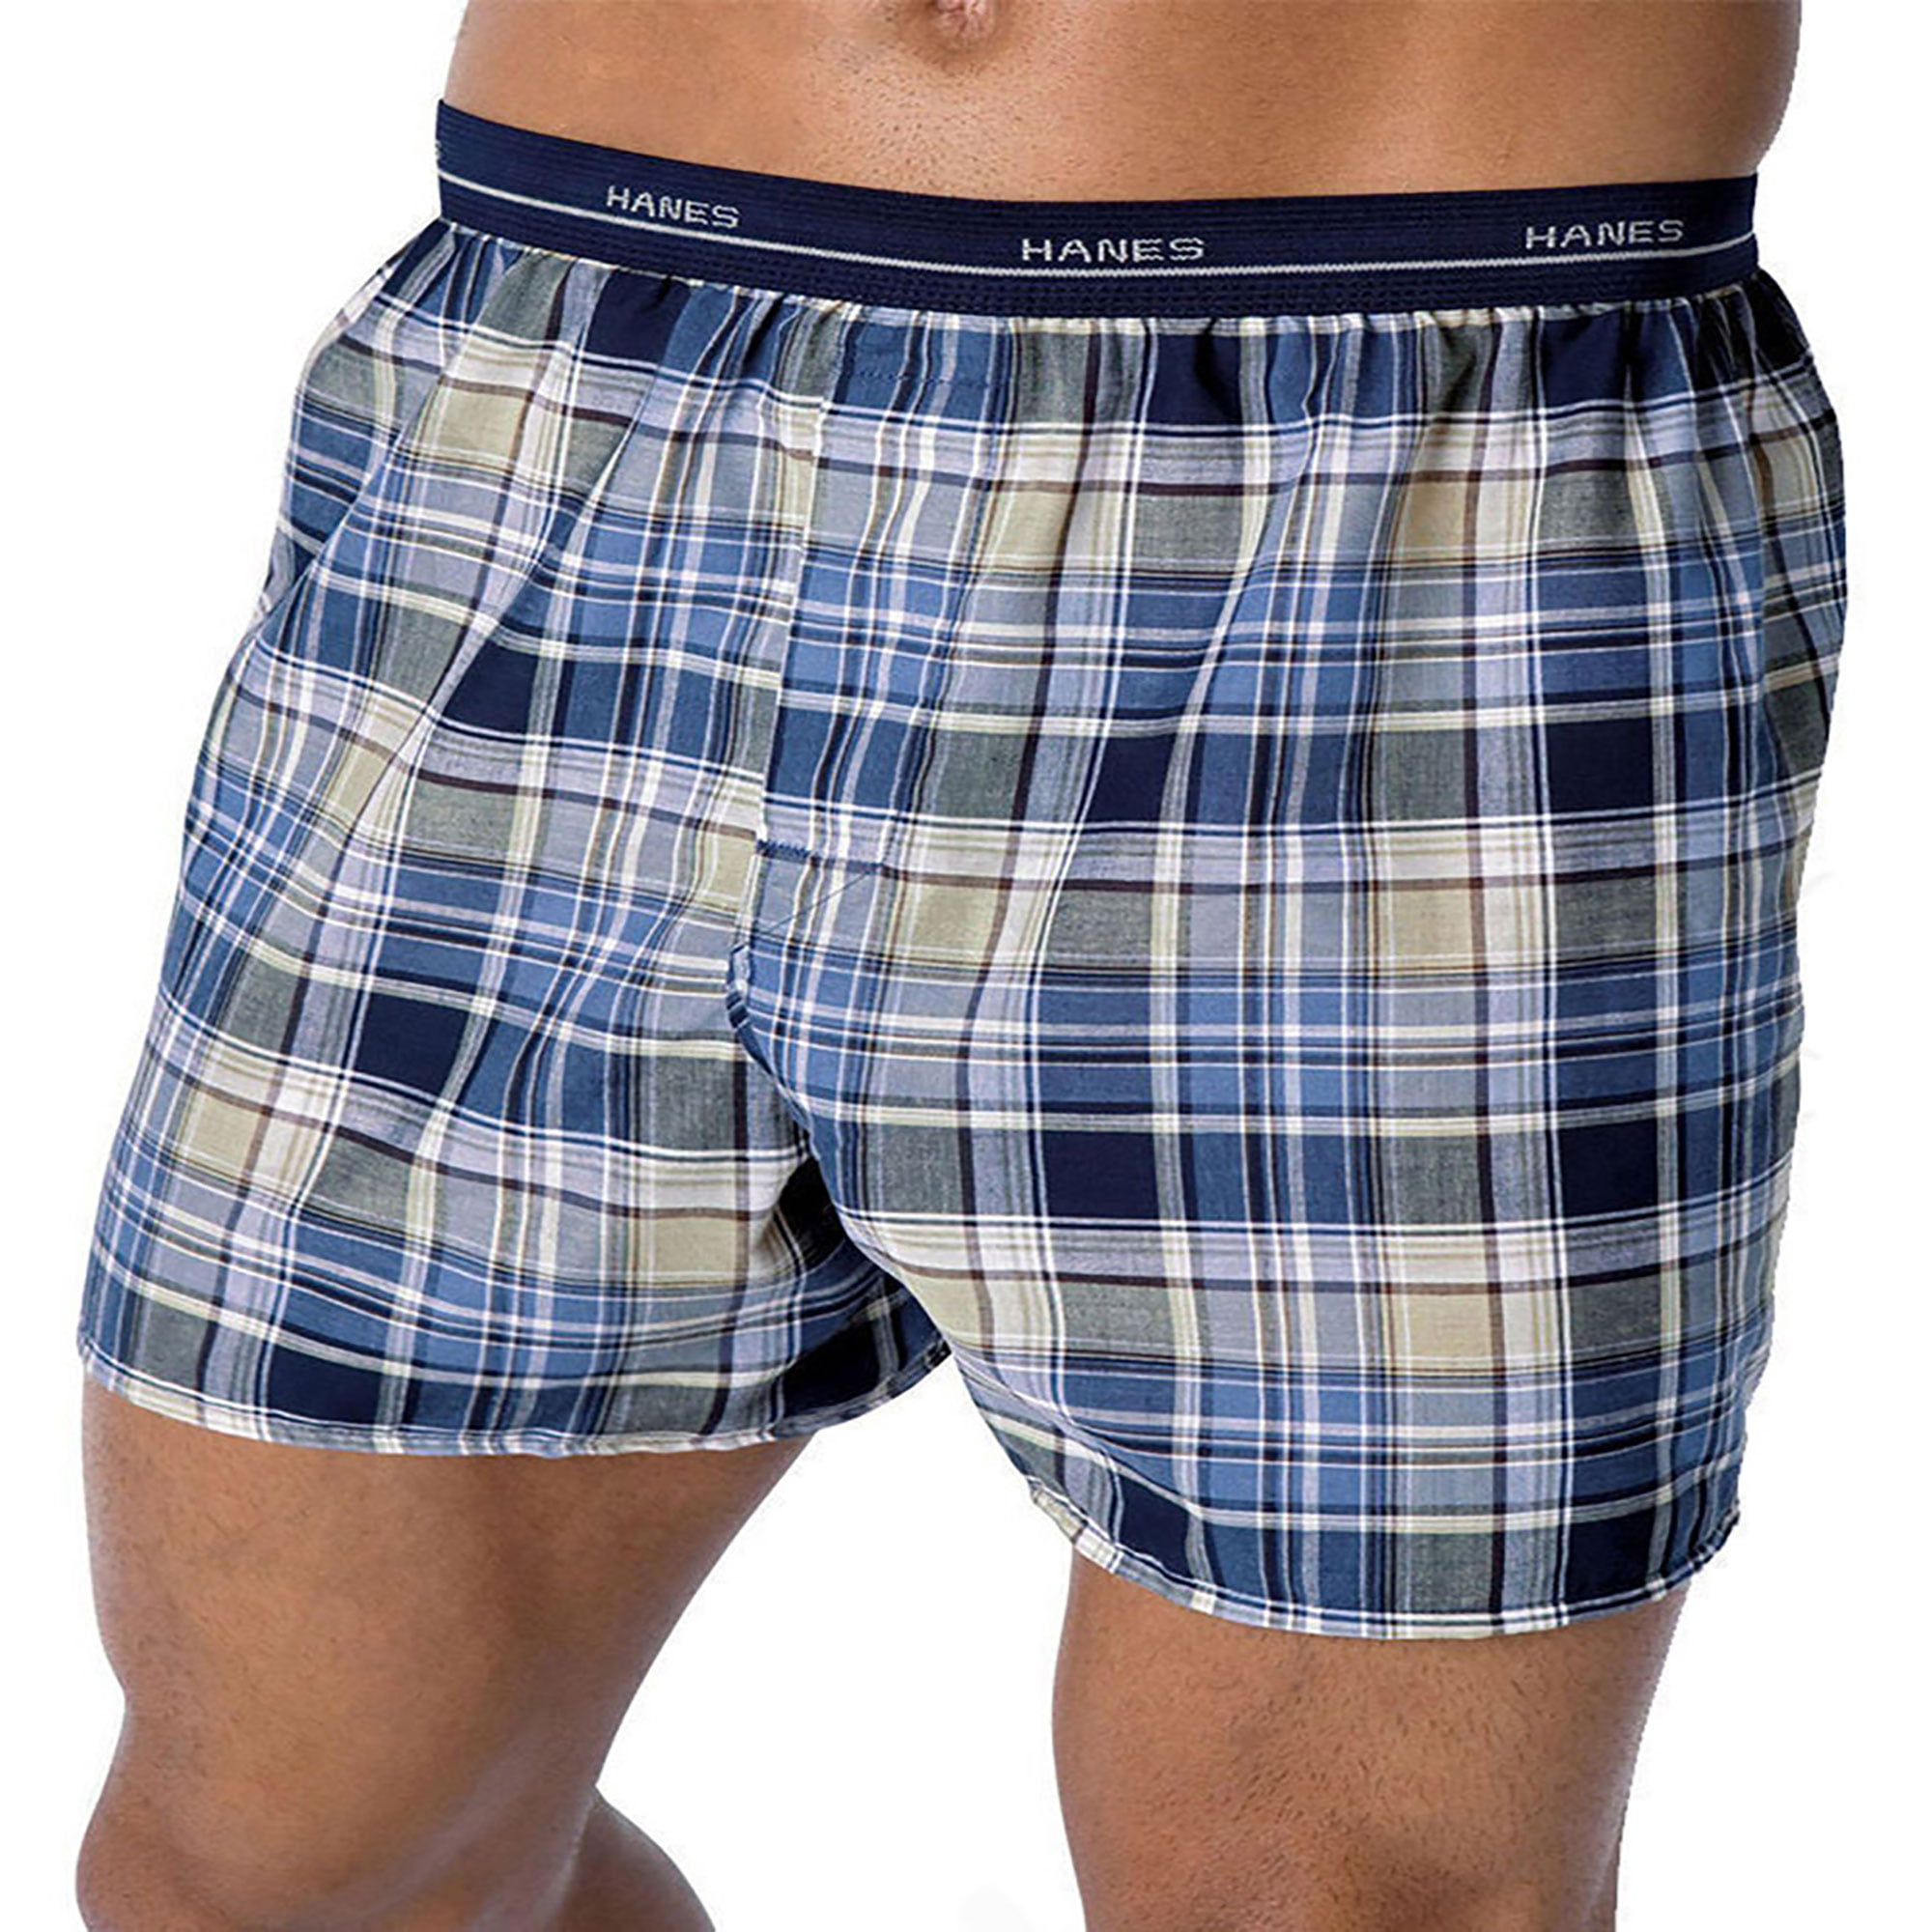 Medium, Plaids / Prints Exposed Waistband Hanes Mens 5-Pack Boxer with Exposed Waistband 